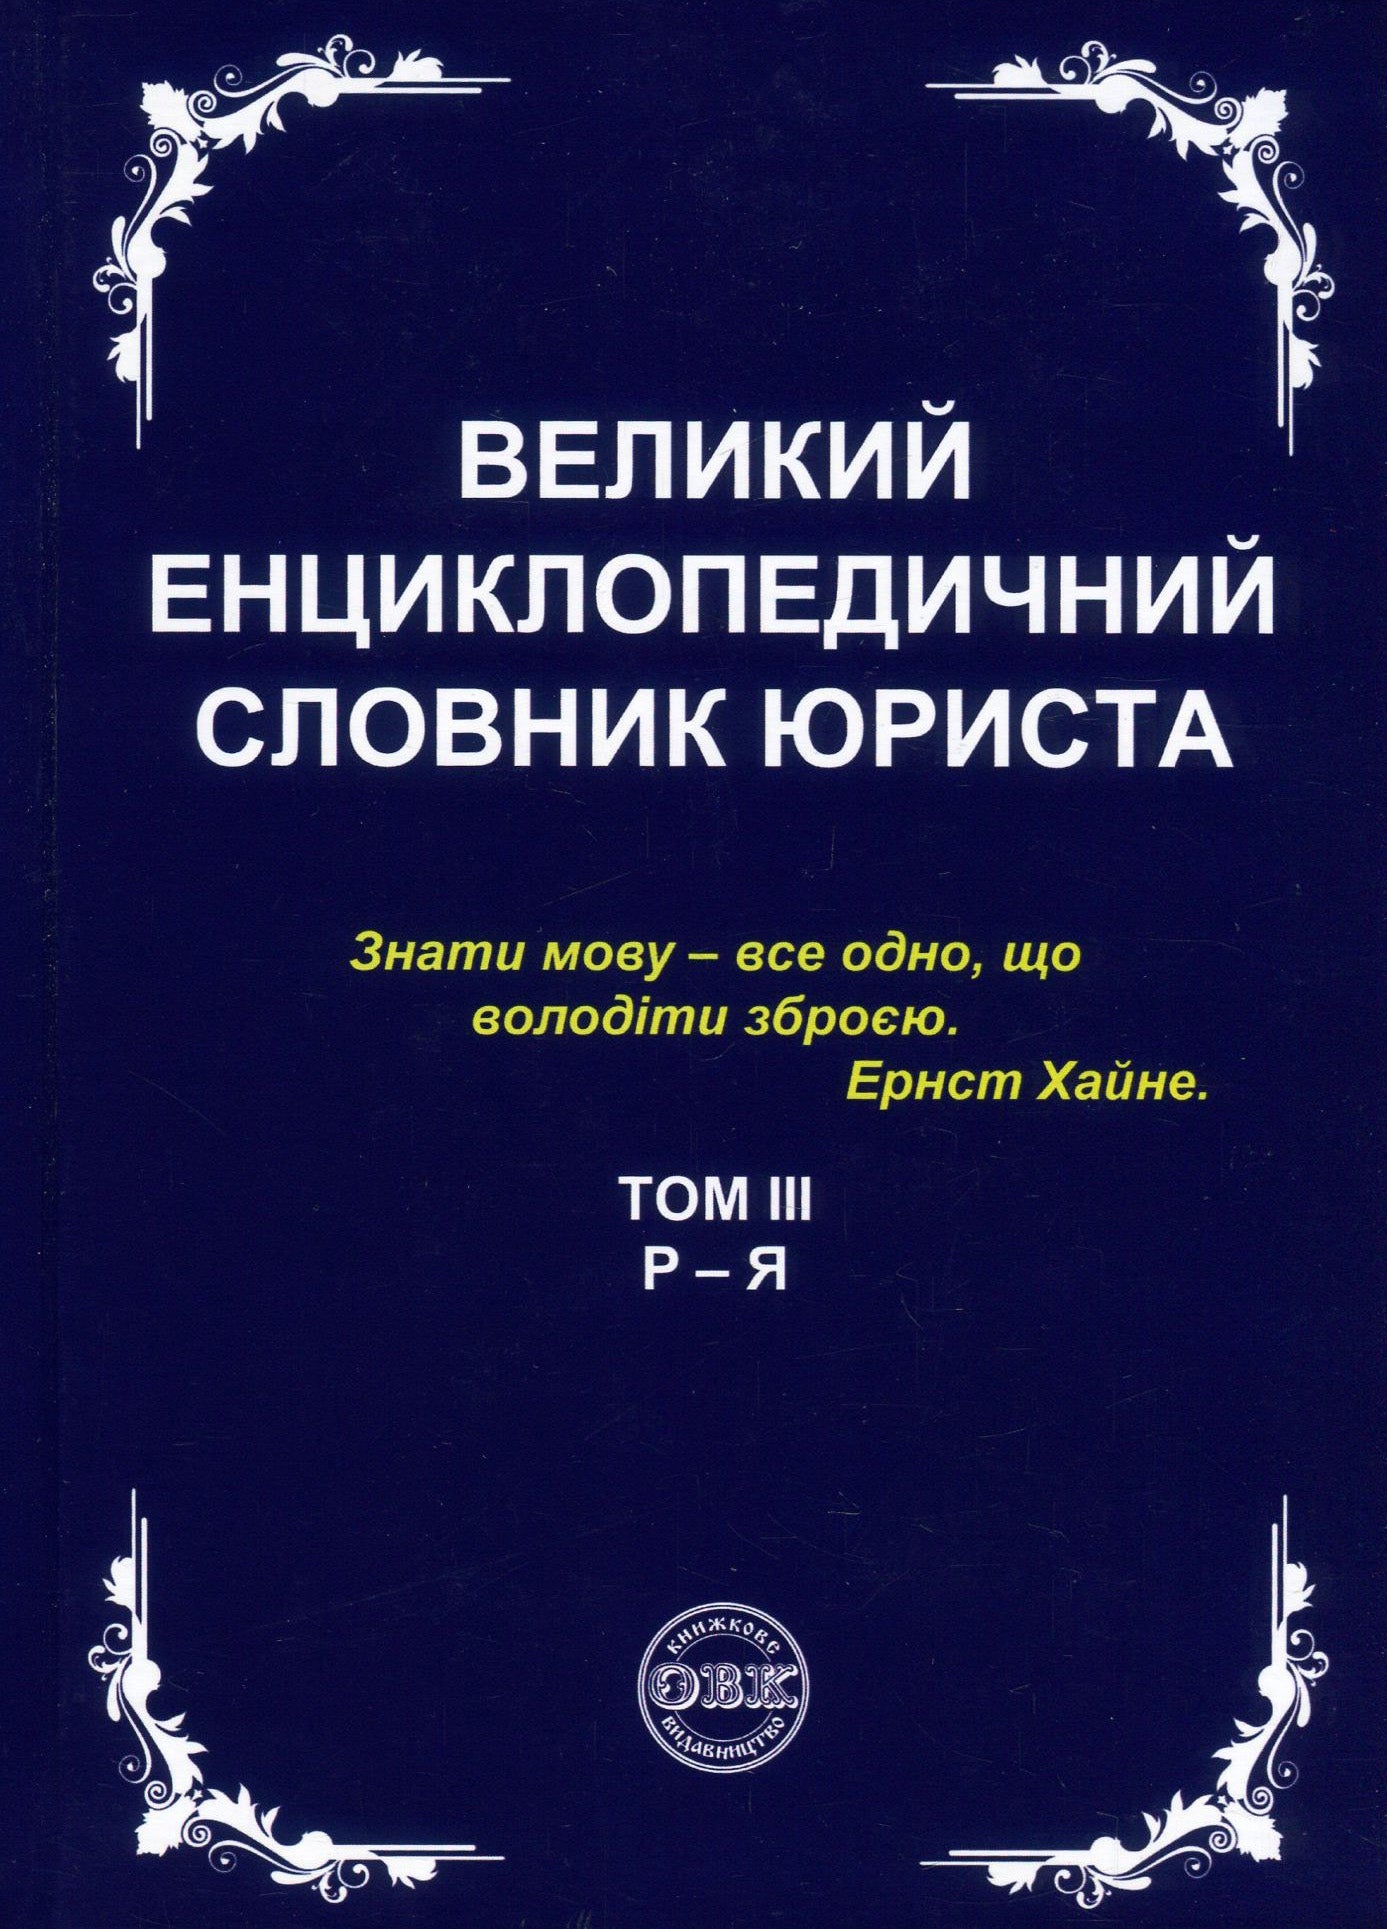 A Large Encyclopedic Dictionary Of A Lawyer. In 3 Volumes (Set Of 3 Books) / Великий енциклопедичний словник юриста. У 3 томах (комплект з 3 книг) / Author not specified 9786177159437,9786177159444,9786177159451,9786177159468-6